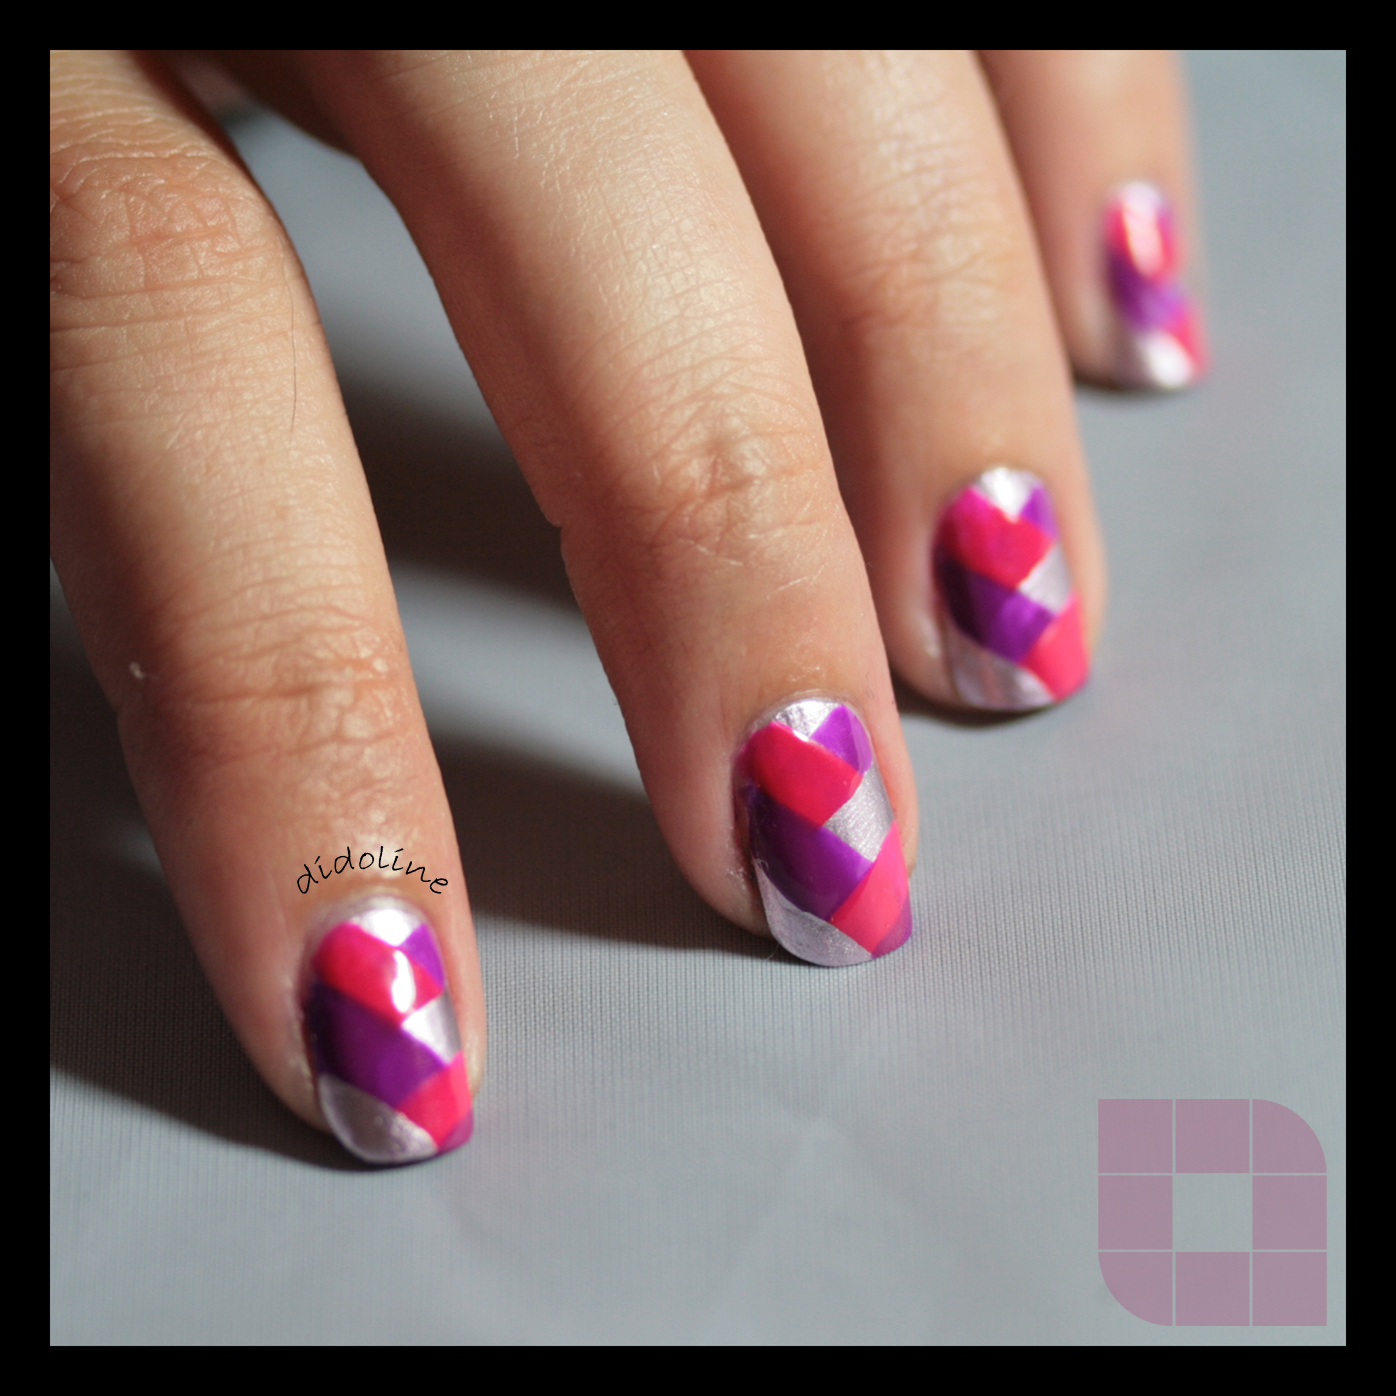 Didoline's Nails (en): The Sunday Nail Battle - Braided Nails